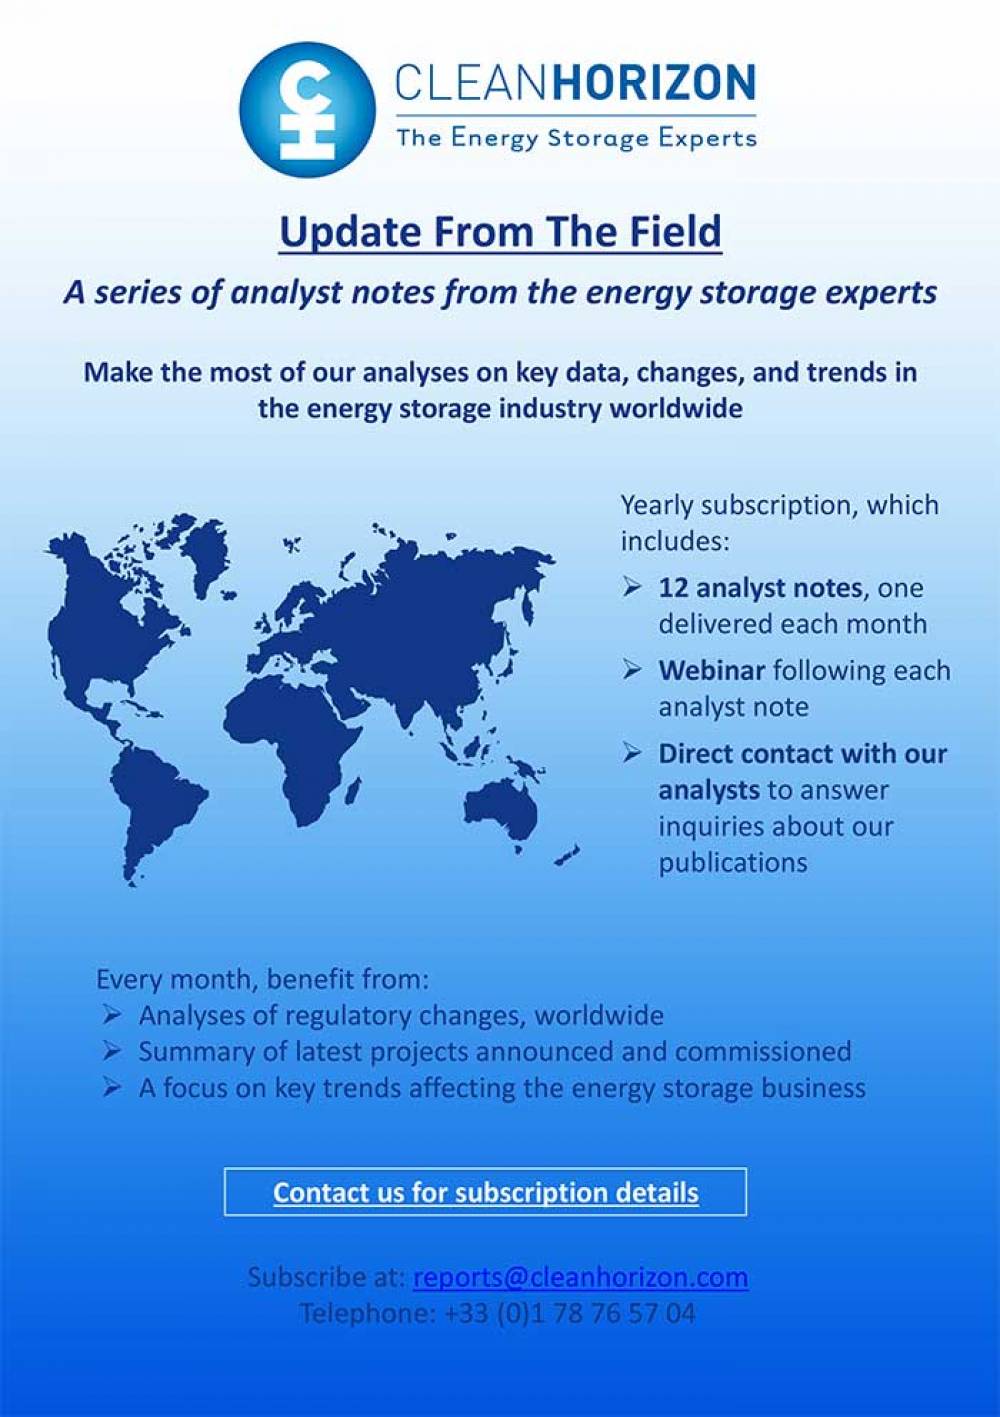 Update From The Field May 2018: Power-to-Gas systems and recent large-scale deployments and increasing support